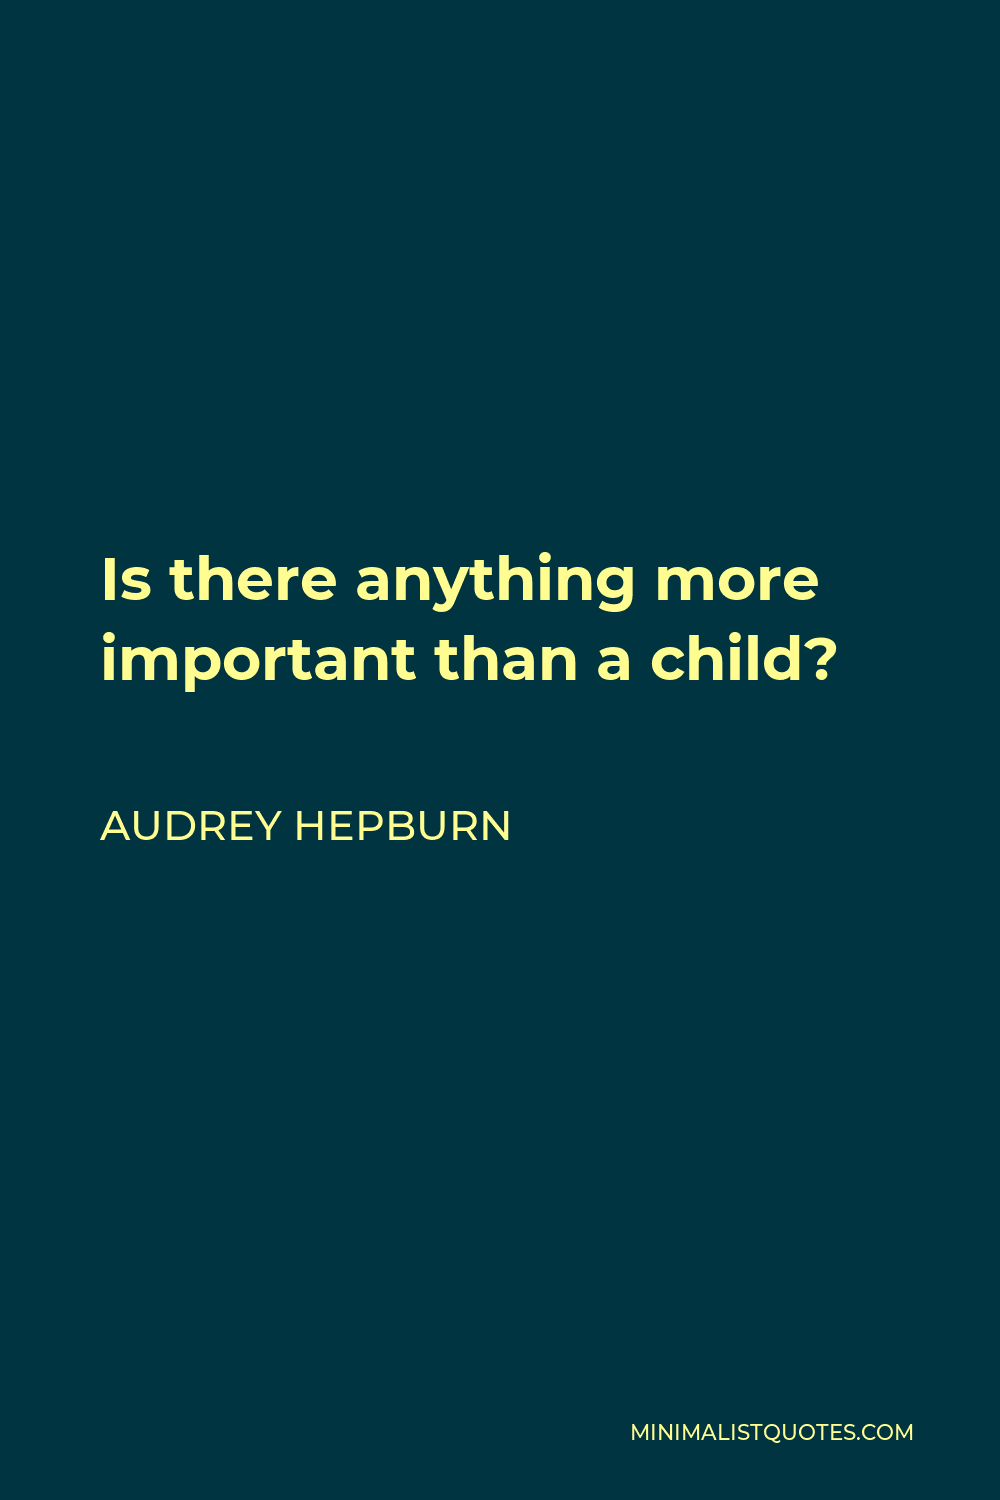 Audrey Hepburn Quote - Is there anything more important than a child?